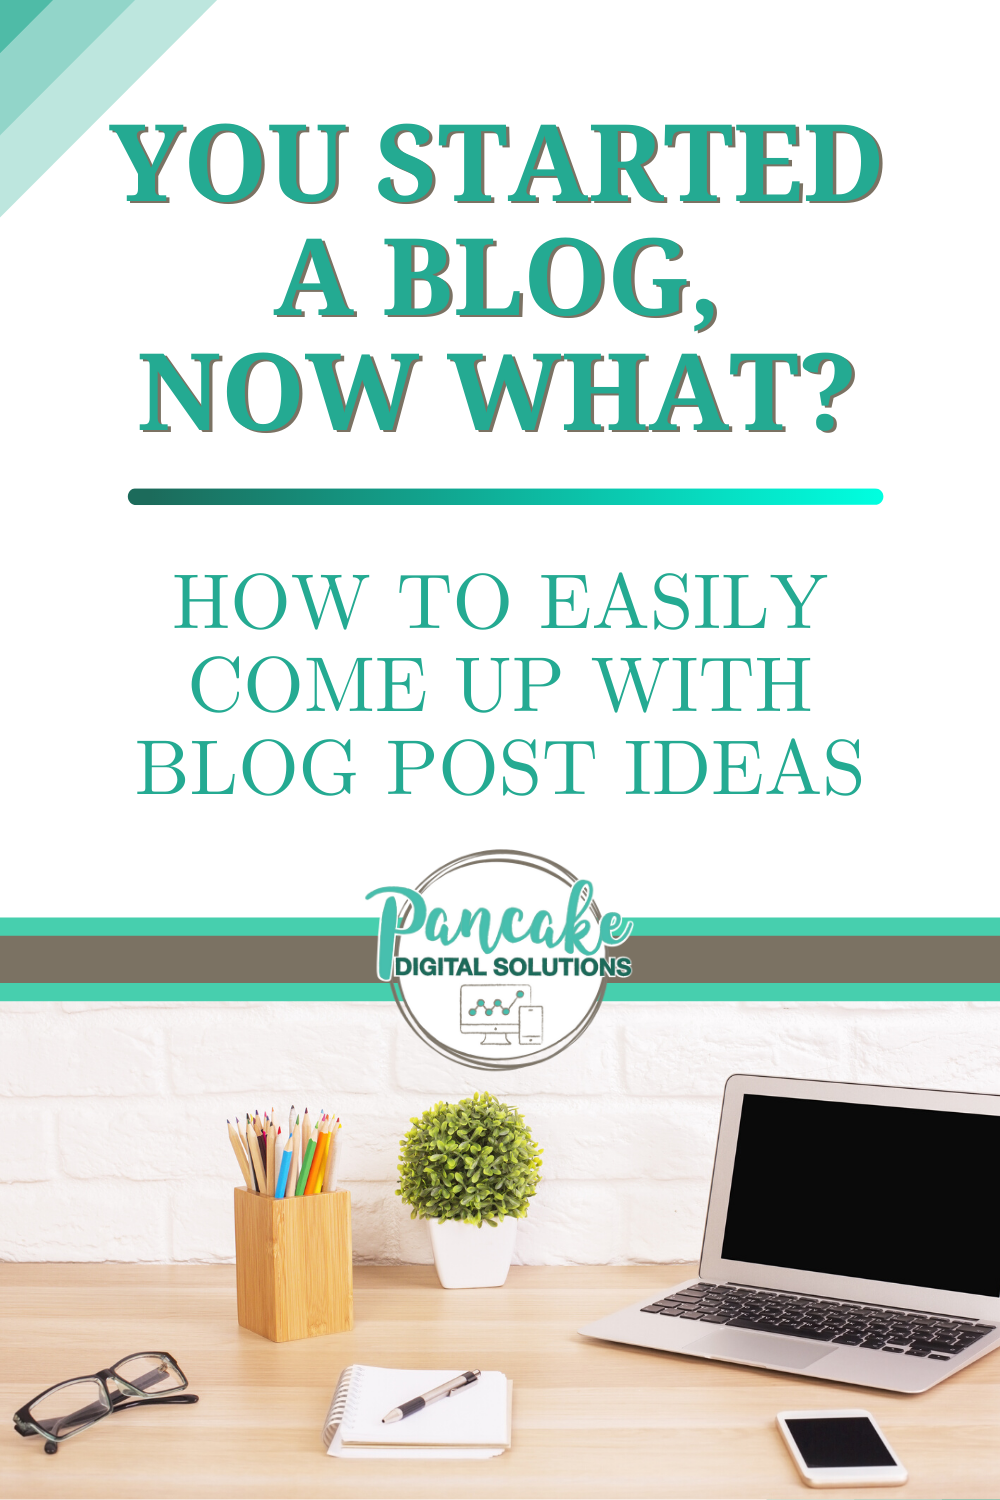 You Started a Blog, Now What? How to Easily Come Up With Blog Post Ideas